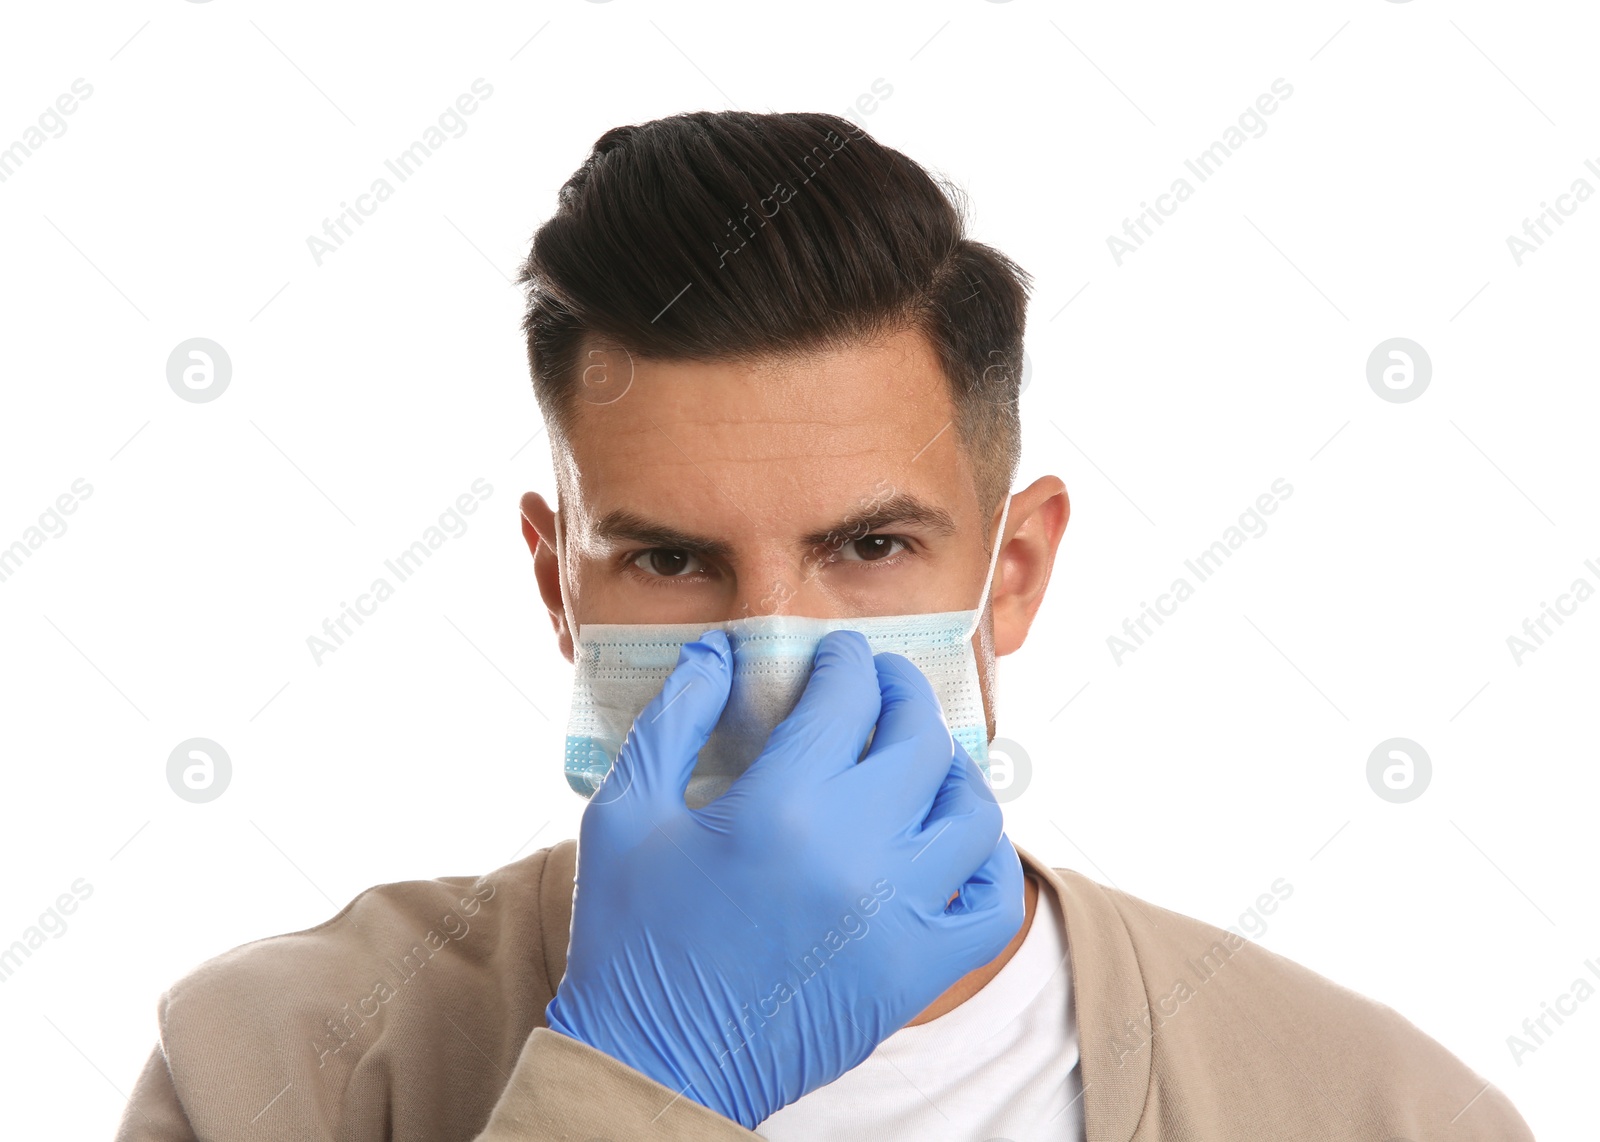 Photo of Man in medical gloves putting on protective face mask against white background